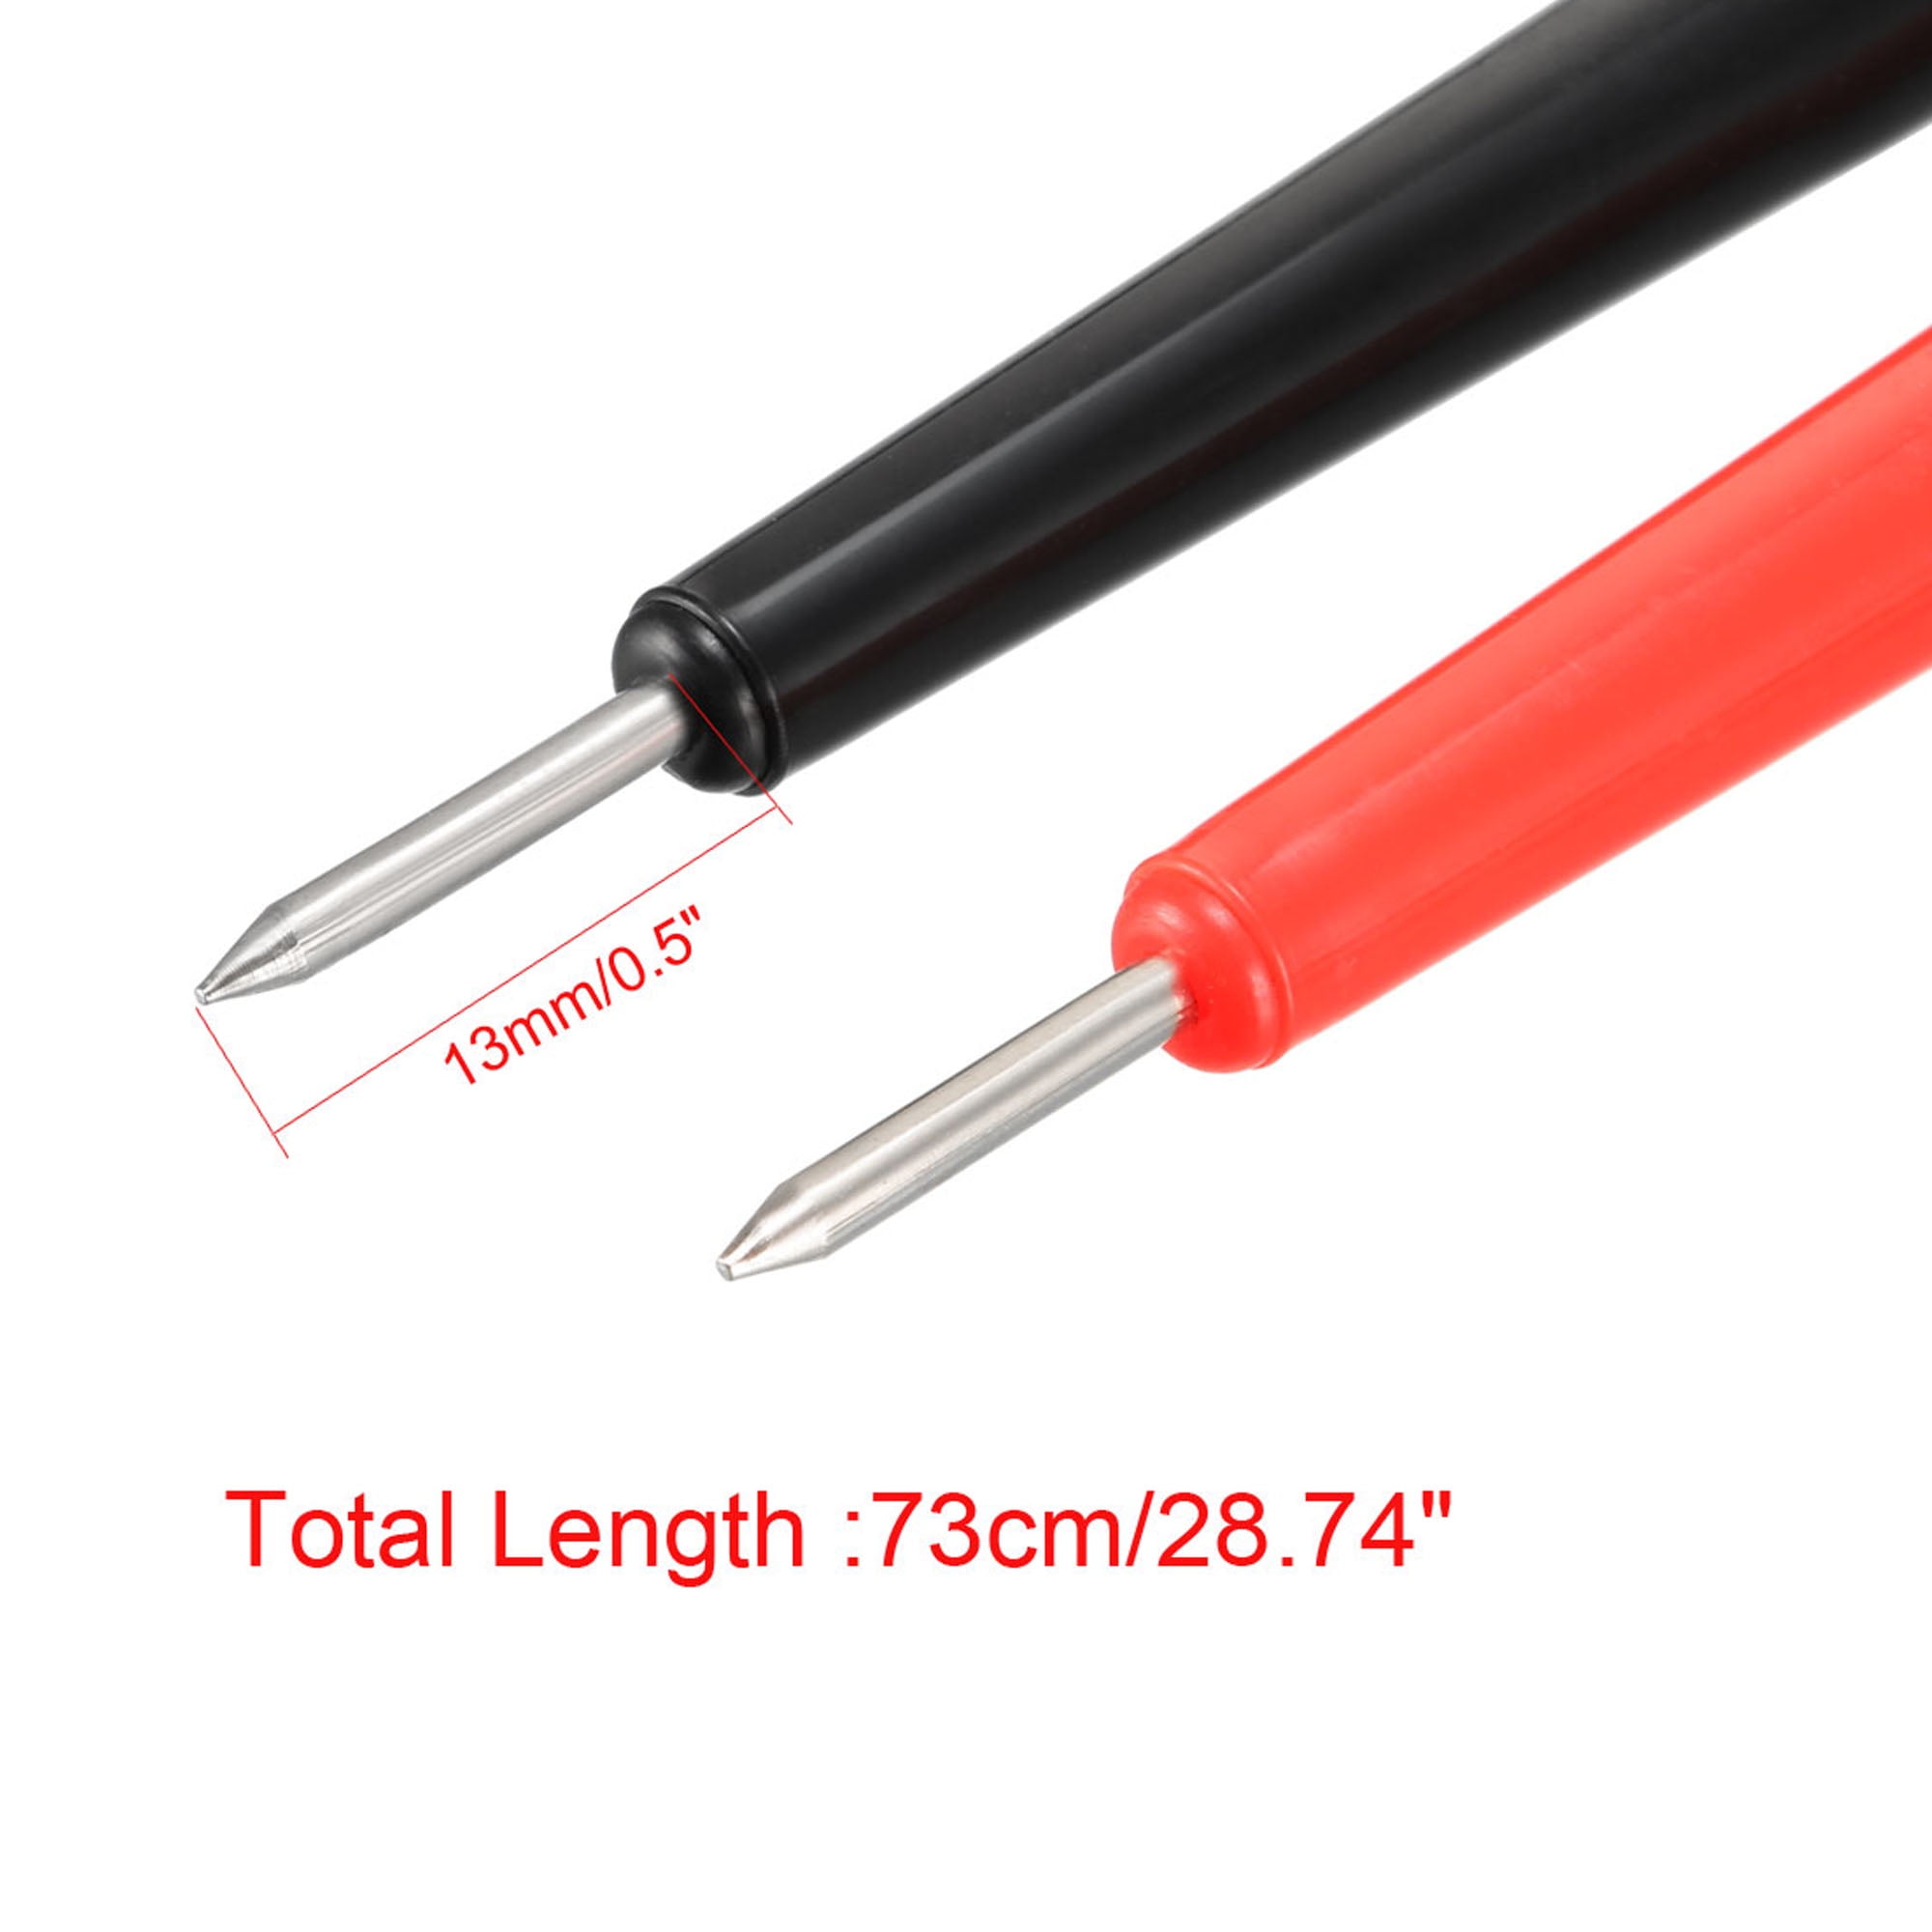 U1169A Test Probe Leads, with 19-mm Tips and 4-mm Tips